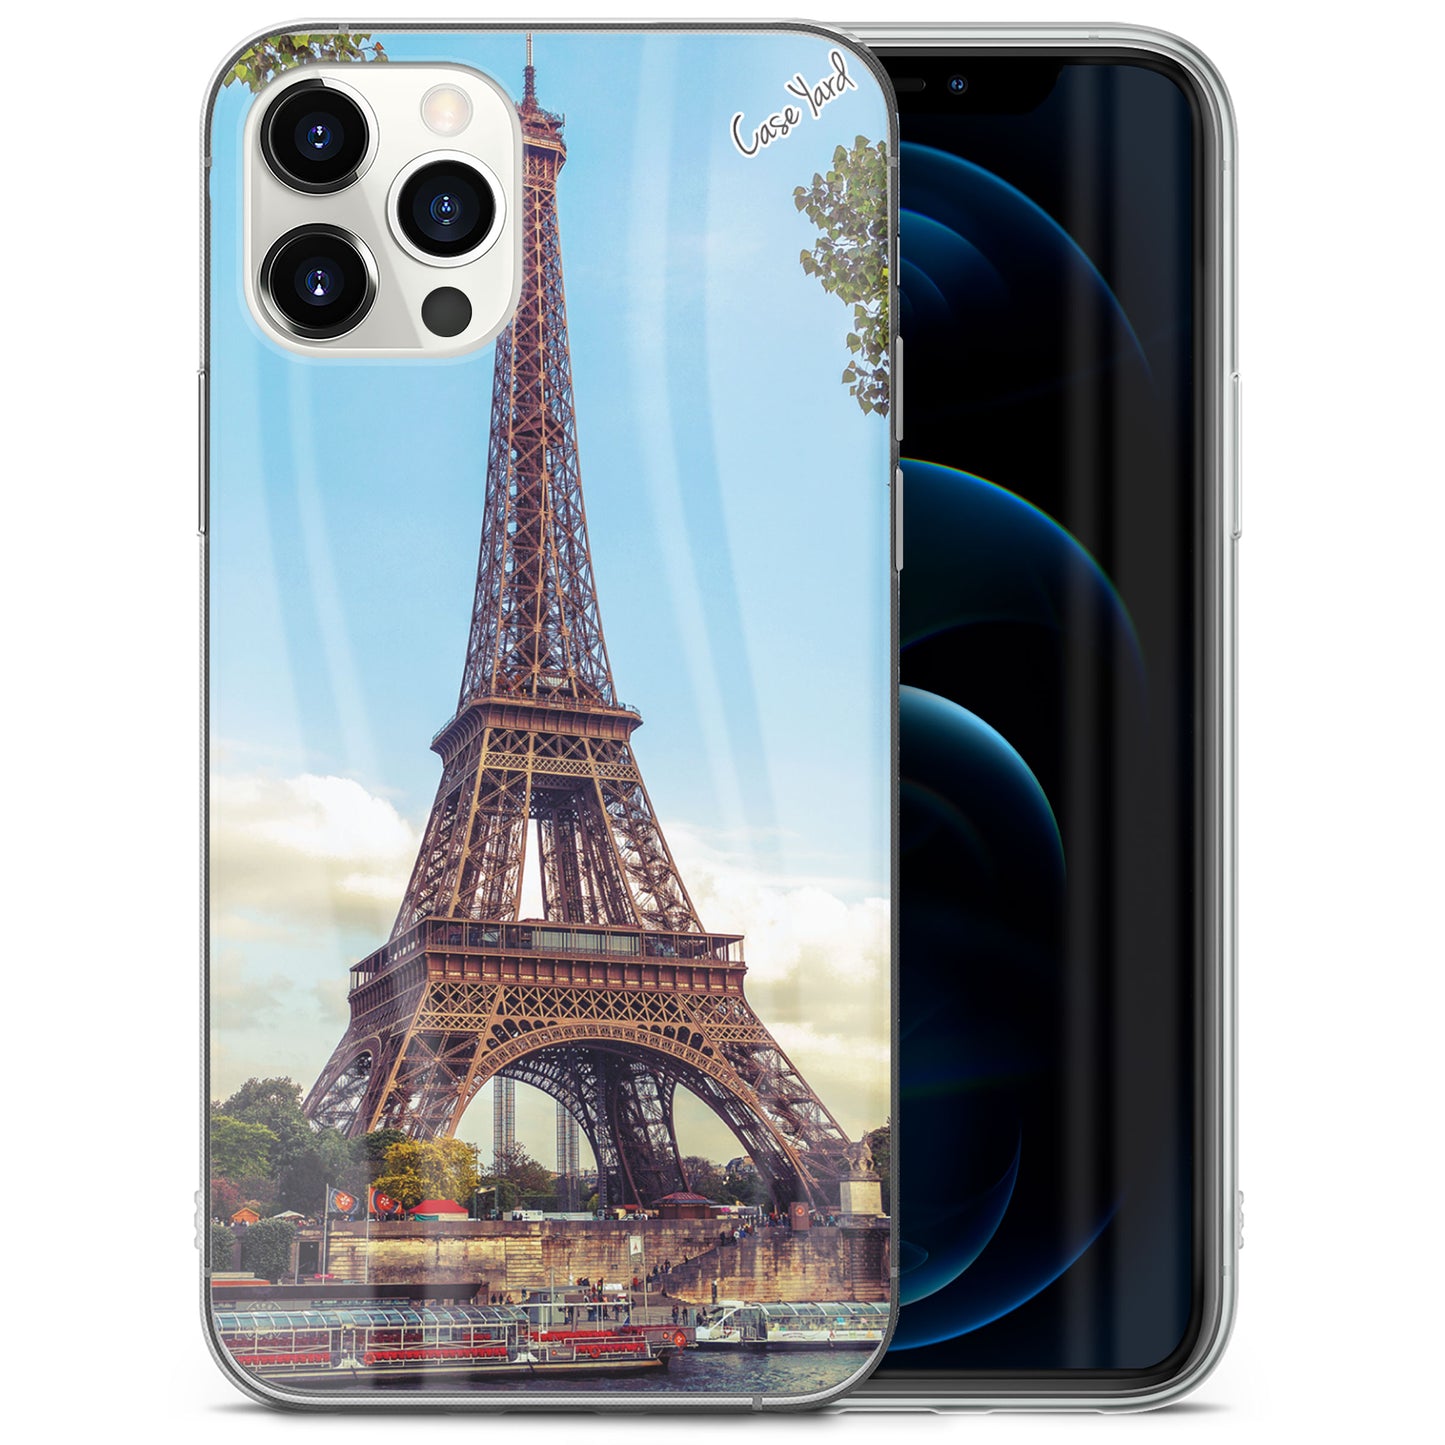 TPU Clear case with (Eiffel Tower) Design for iPhone & Samsung Phones